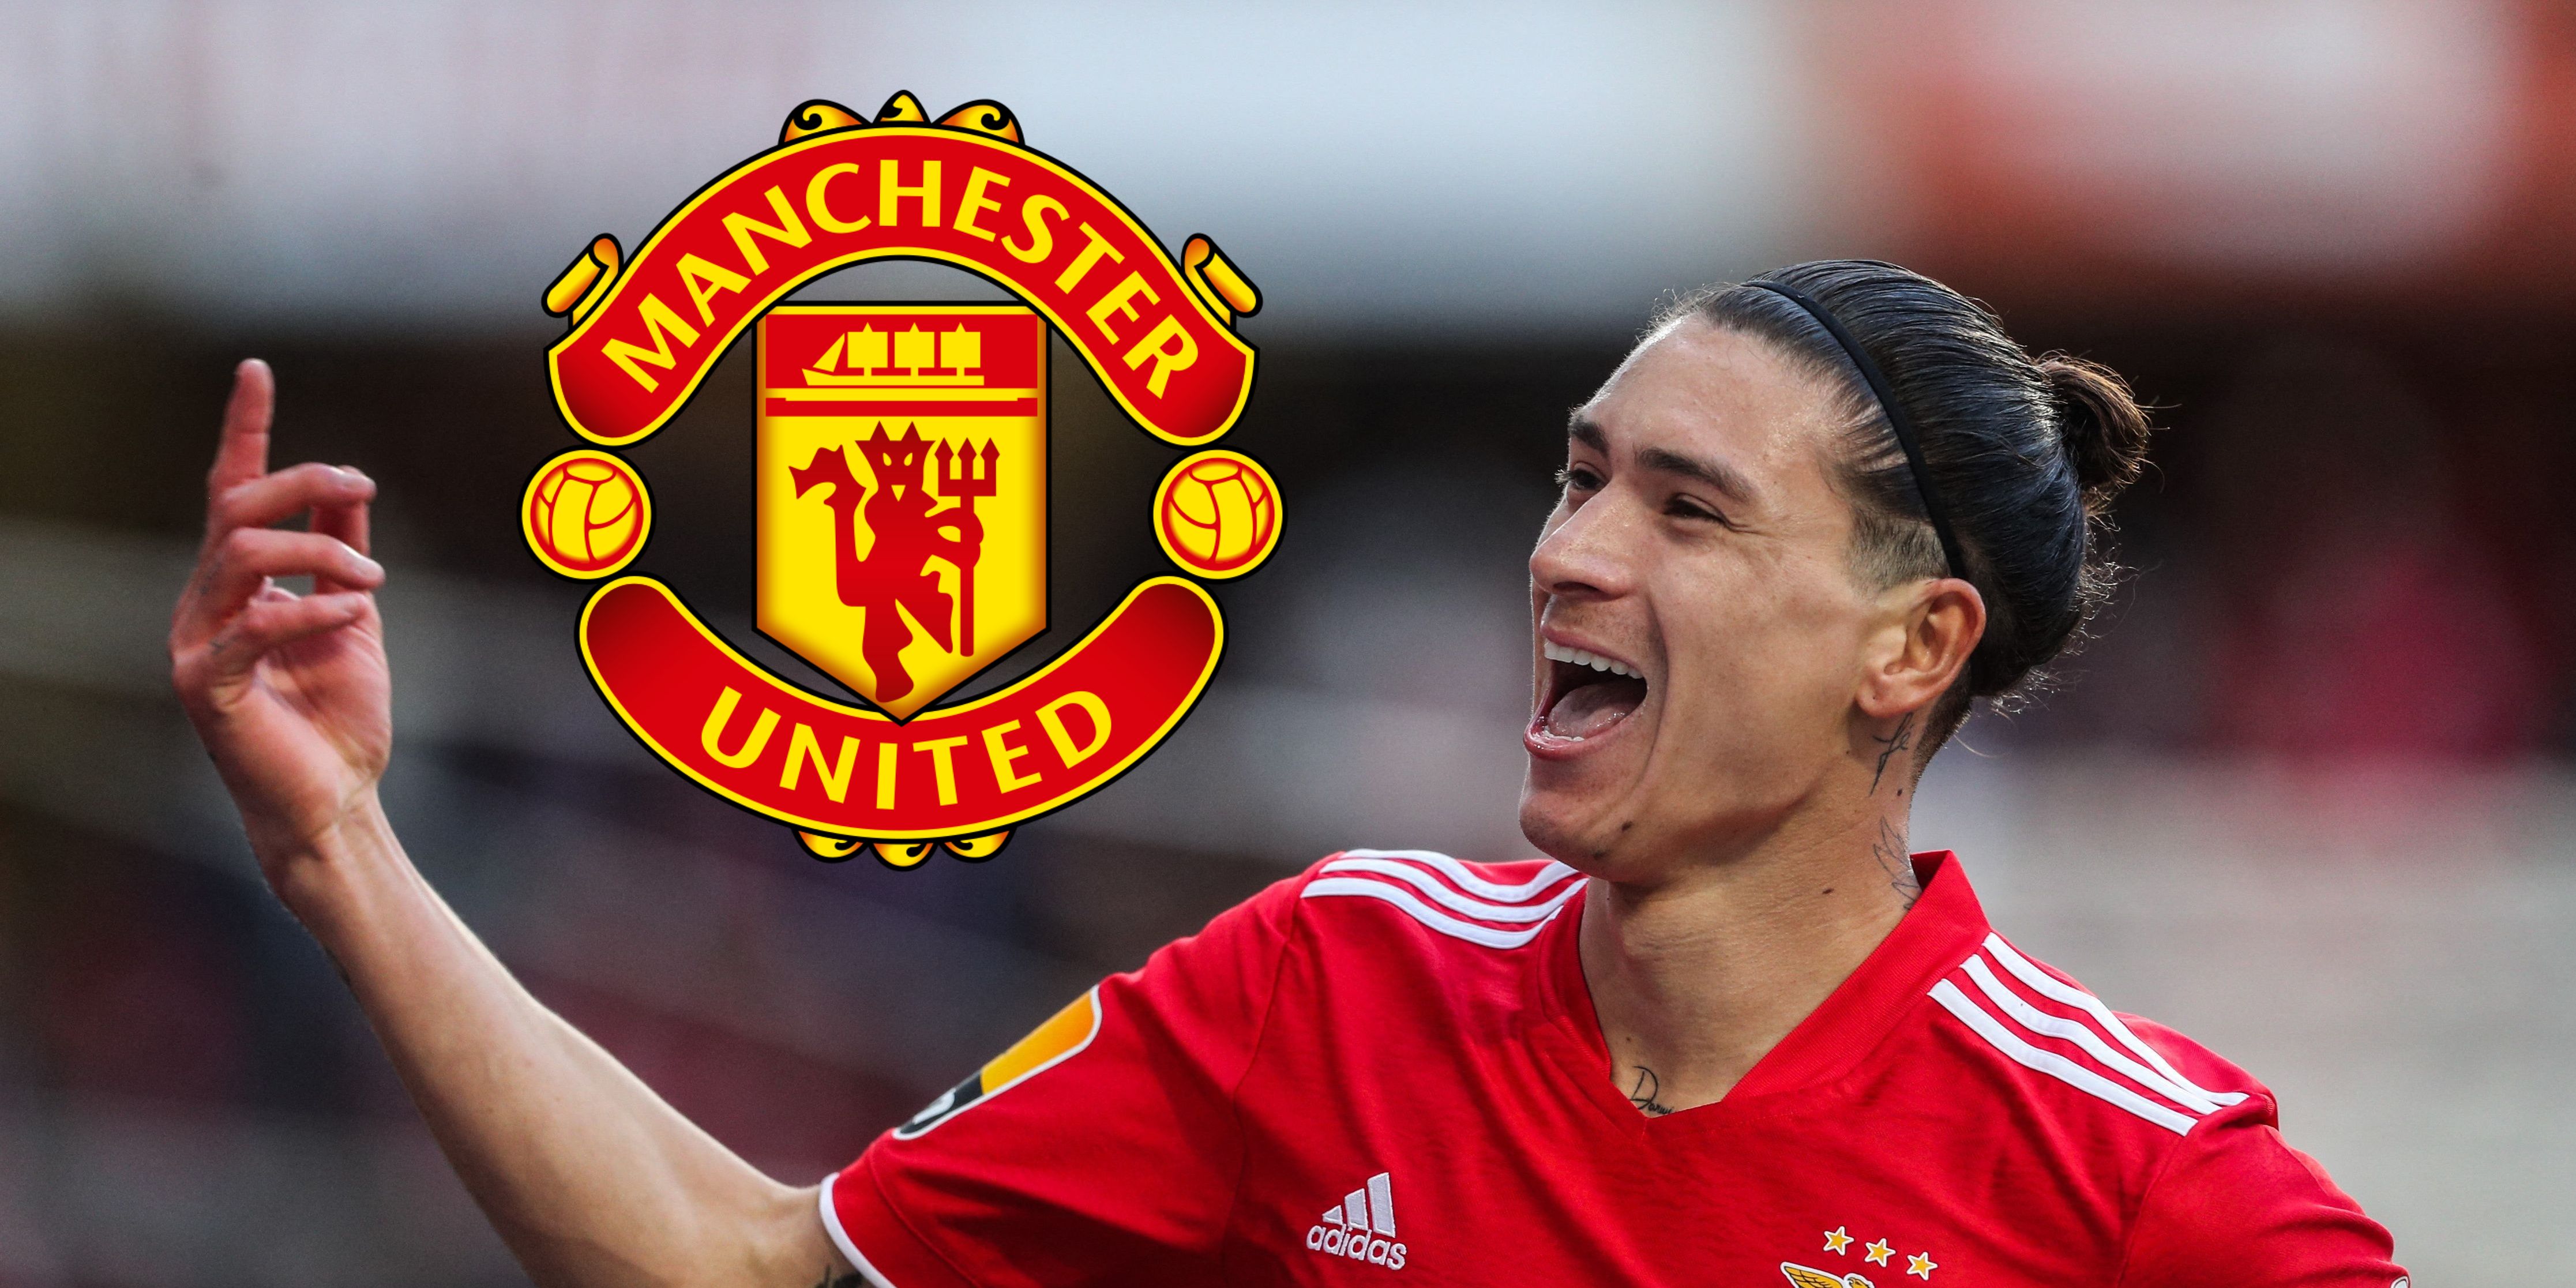 Darwin Nunez responds to Manchester United interest as Liverpool pursuit challenged by Ten Hag rebuild hopes